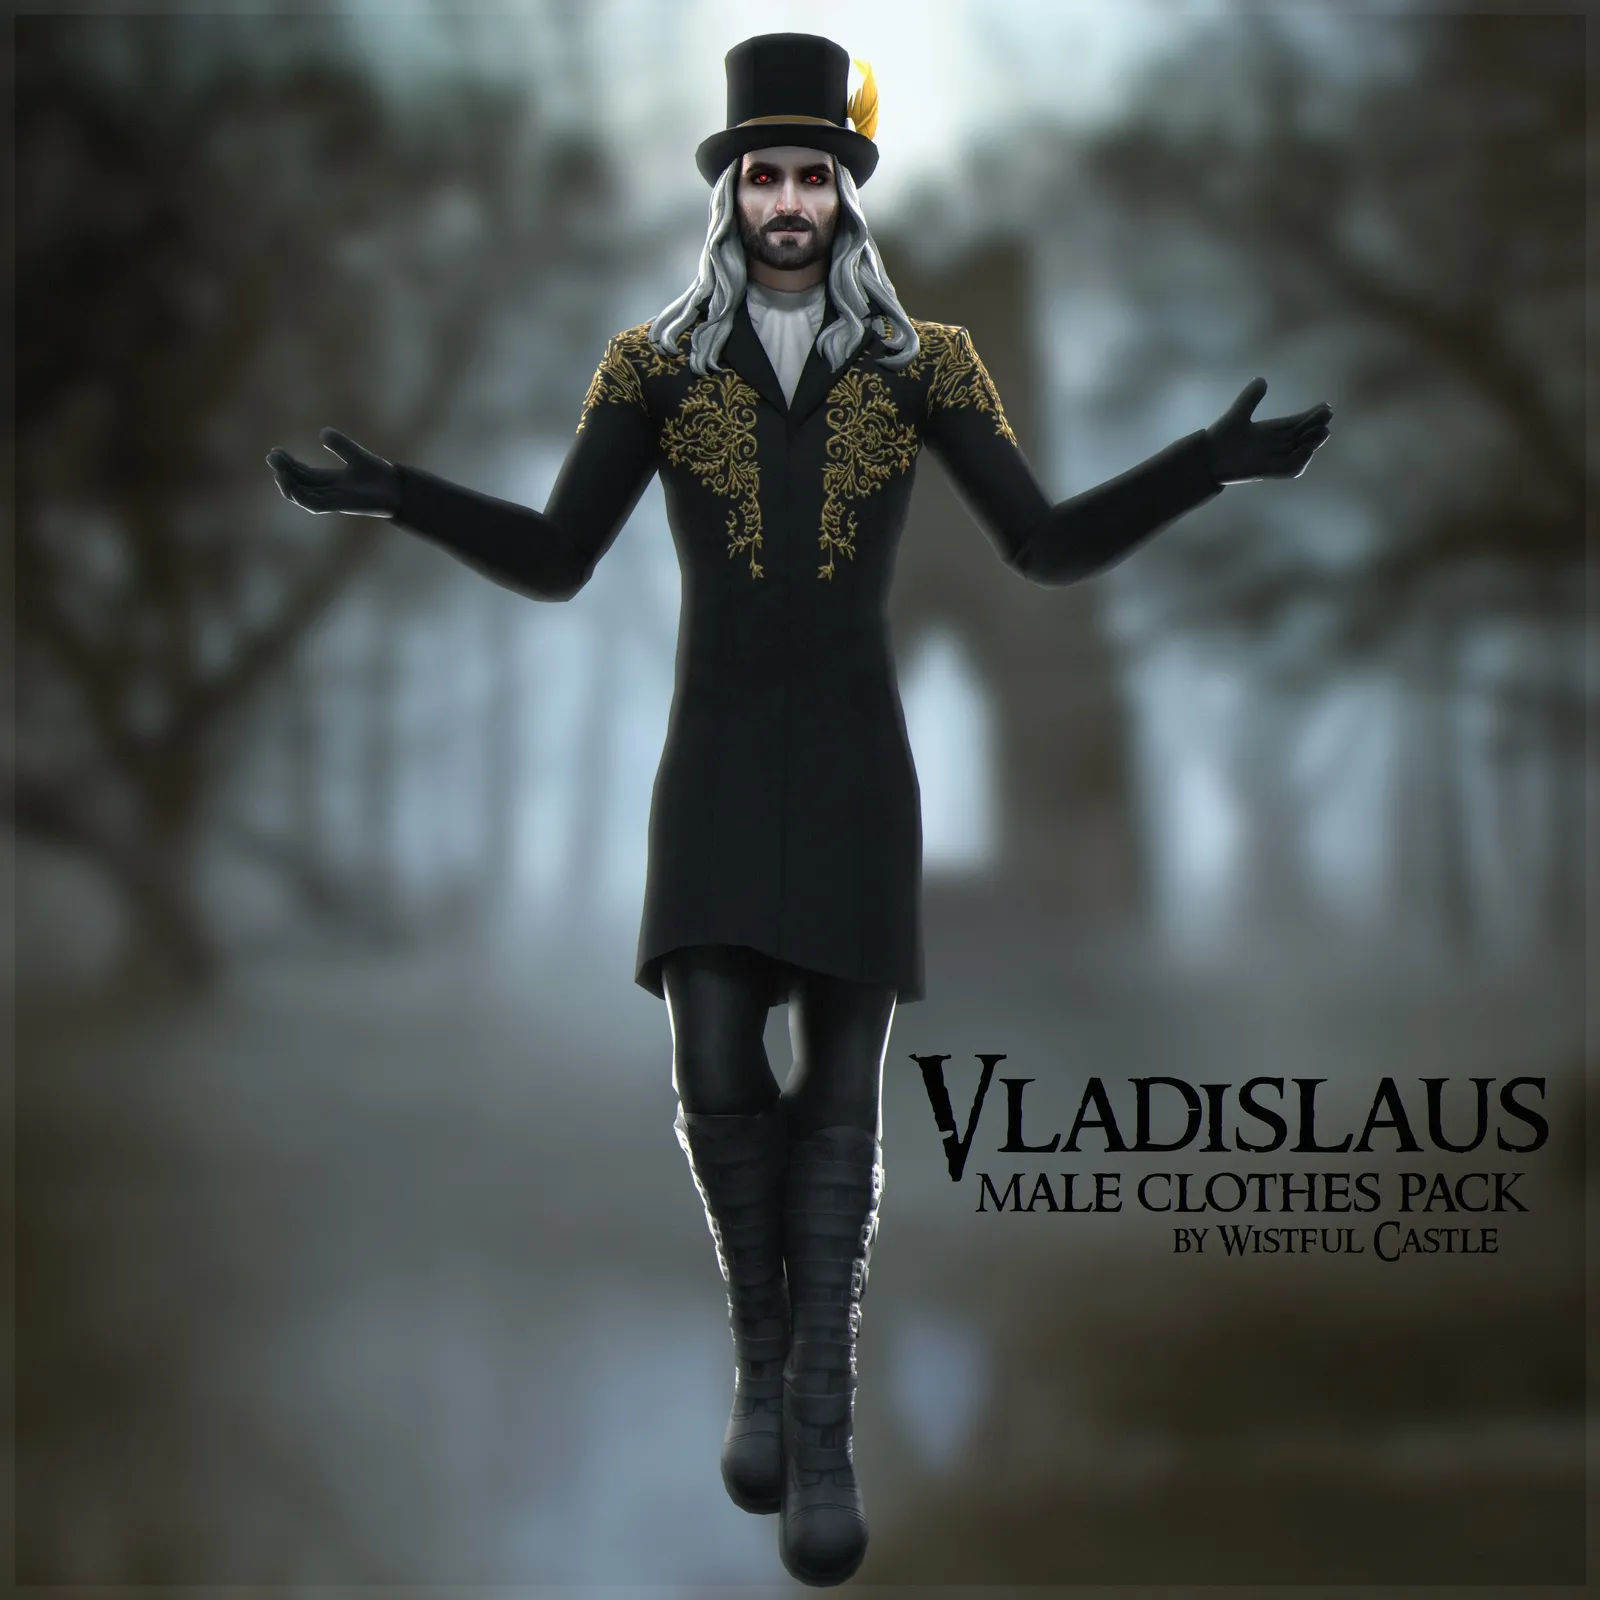 Vladislaus (male clothes pack)